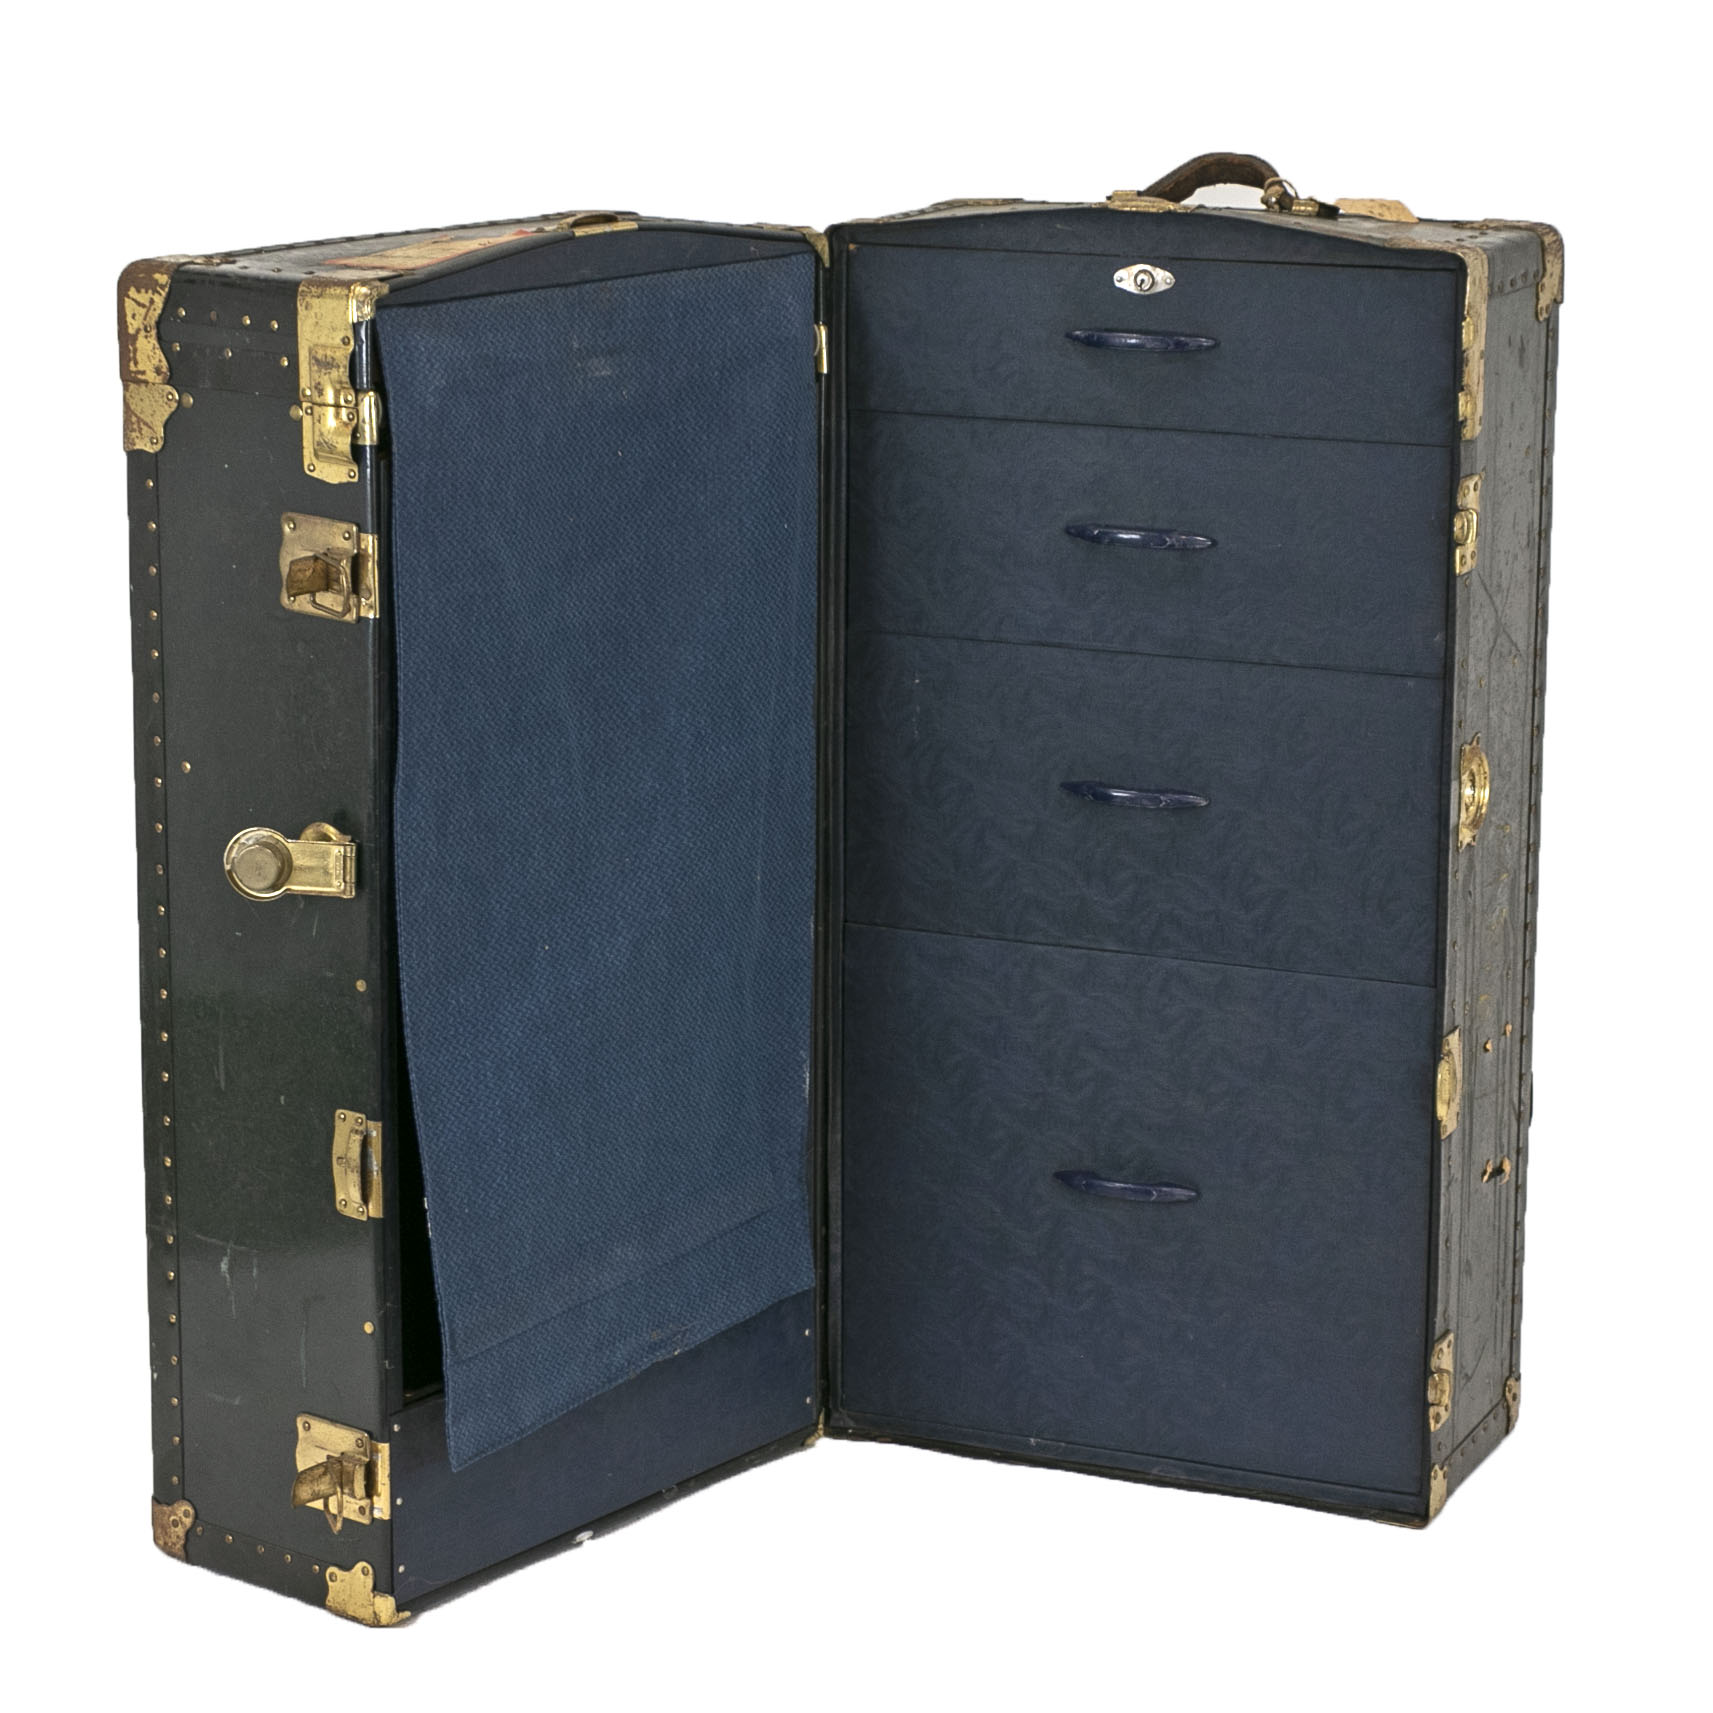 Sold at Auction: Antique Steamer Trunk Wardrobe/Cabin Wardrobe by Meyering,  Chicago - fully lined interior with 5 assorted drawers with internal  storage compartments and lift out trays, steel drop handles with chrome